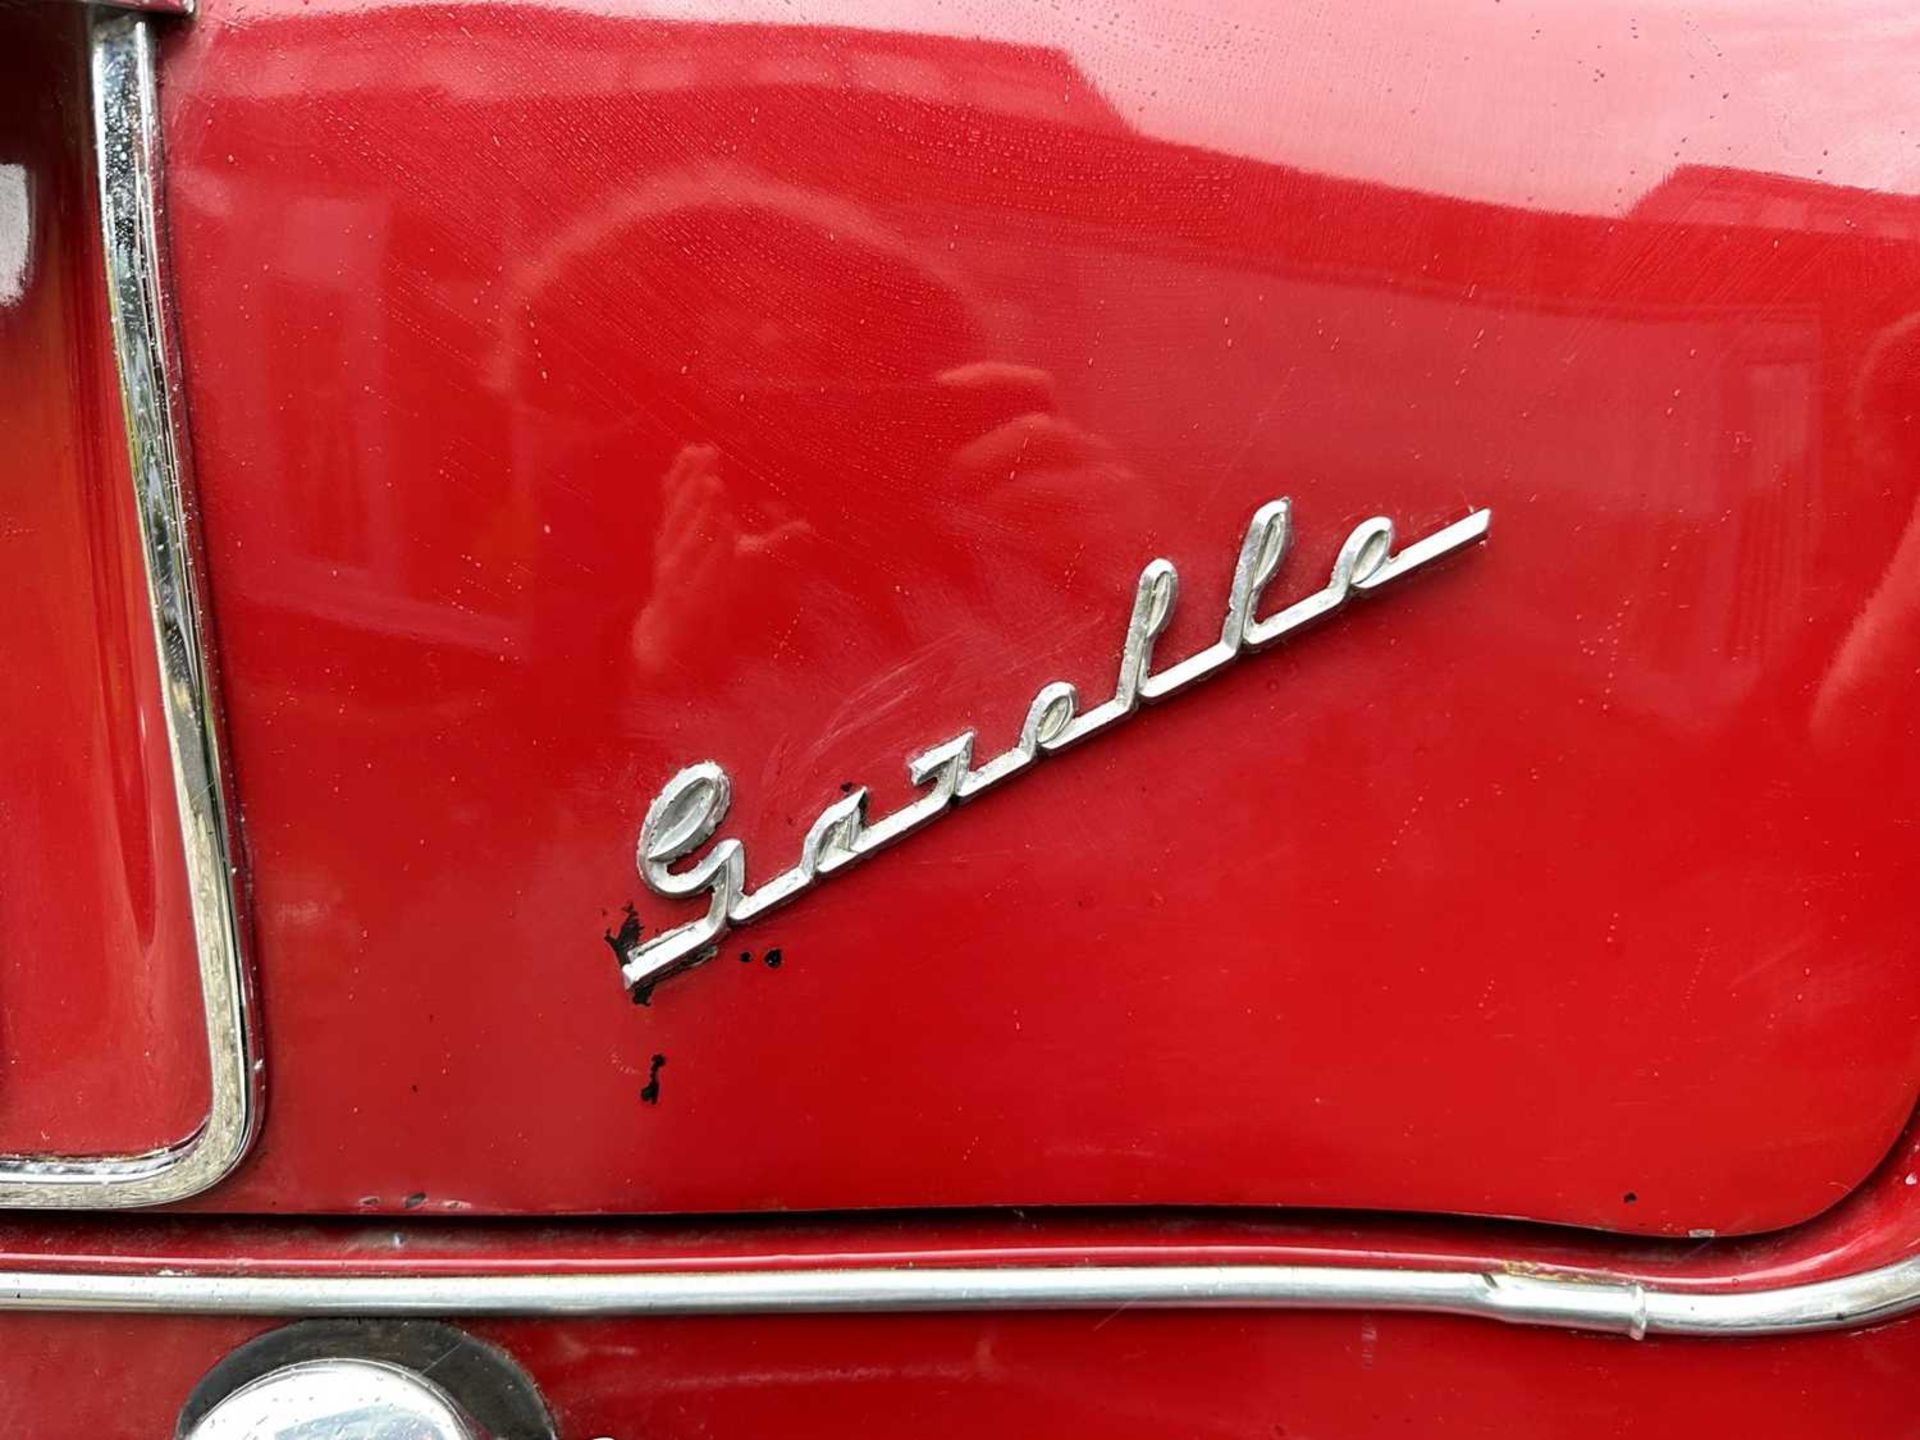 1961 Singer Gazelle Convertible Comes complete with overdrive, period radio and badge bar - Image 80 of 95